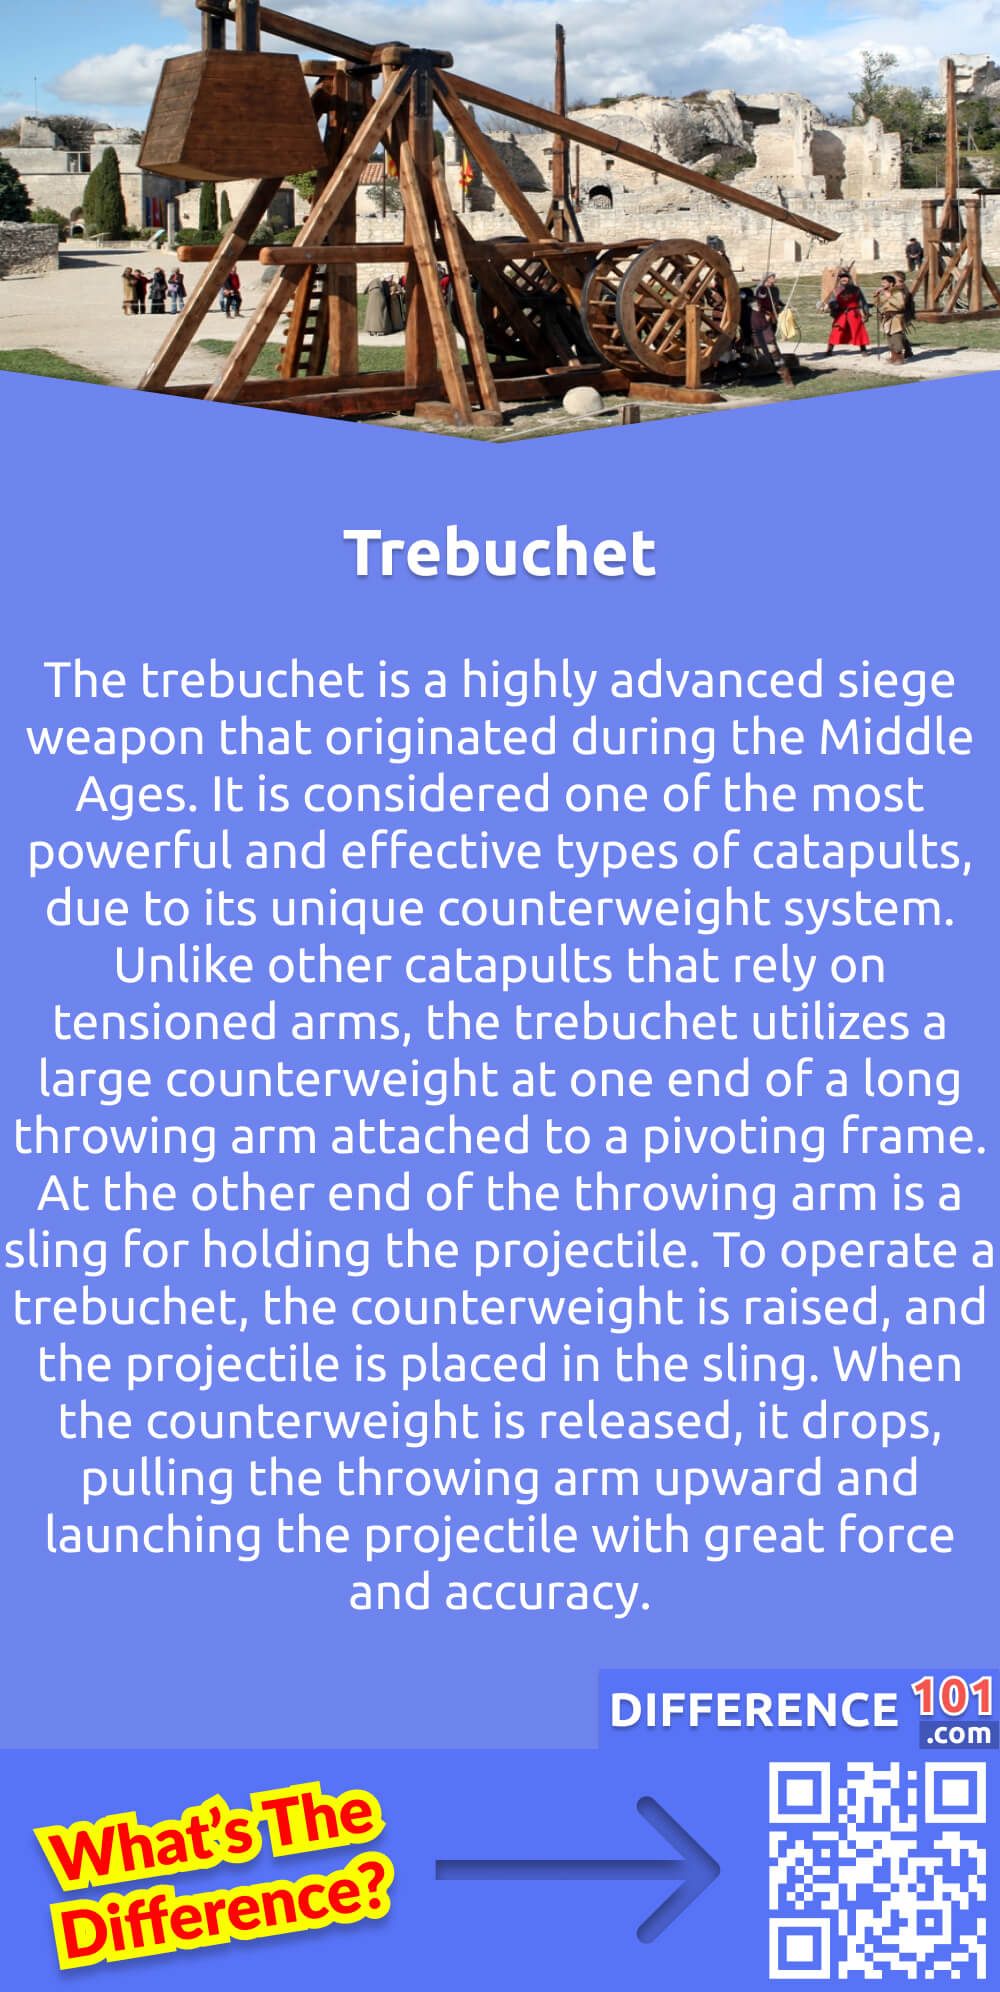 What Is Trebuchet? The trebuchet is a highly advanced siege weapon that originated during the Middle Ages. It is considered one of the most powerful and effective types of catapults, due to its unique counterweight system. Unlike other catapults that rely on tensioned arms, the trebuchet utilizes a large counterweight at one end of a long throwing arm attached to a pivoting frame. At the other end of the throwing arm is a sling for holding the projectile. To operate a trebuchet, the counterweight is raised, and the projectile is placed in the sling. When the counterweight is released, it drops, pulling the throwing arm upward and launching the projectile with great force and accuracy. The trebuchet was capable of hurling larger projectiles over longer distances than other siege weapons of its time, making it a formidable weapon on the battlefield.